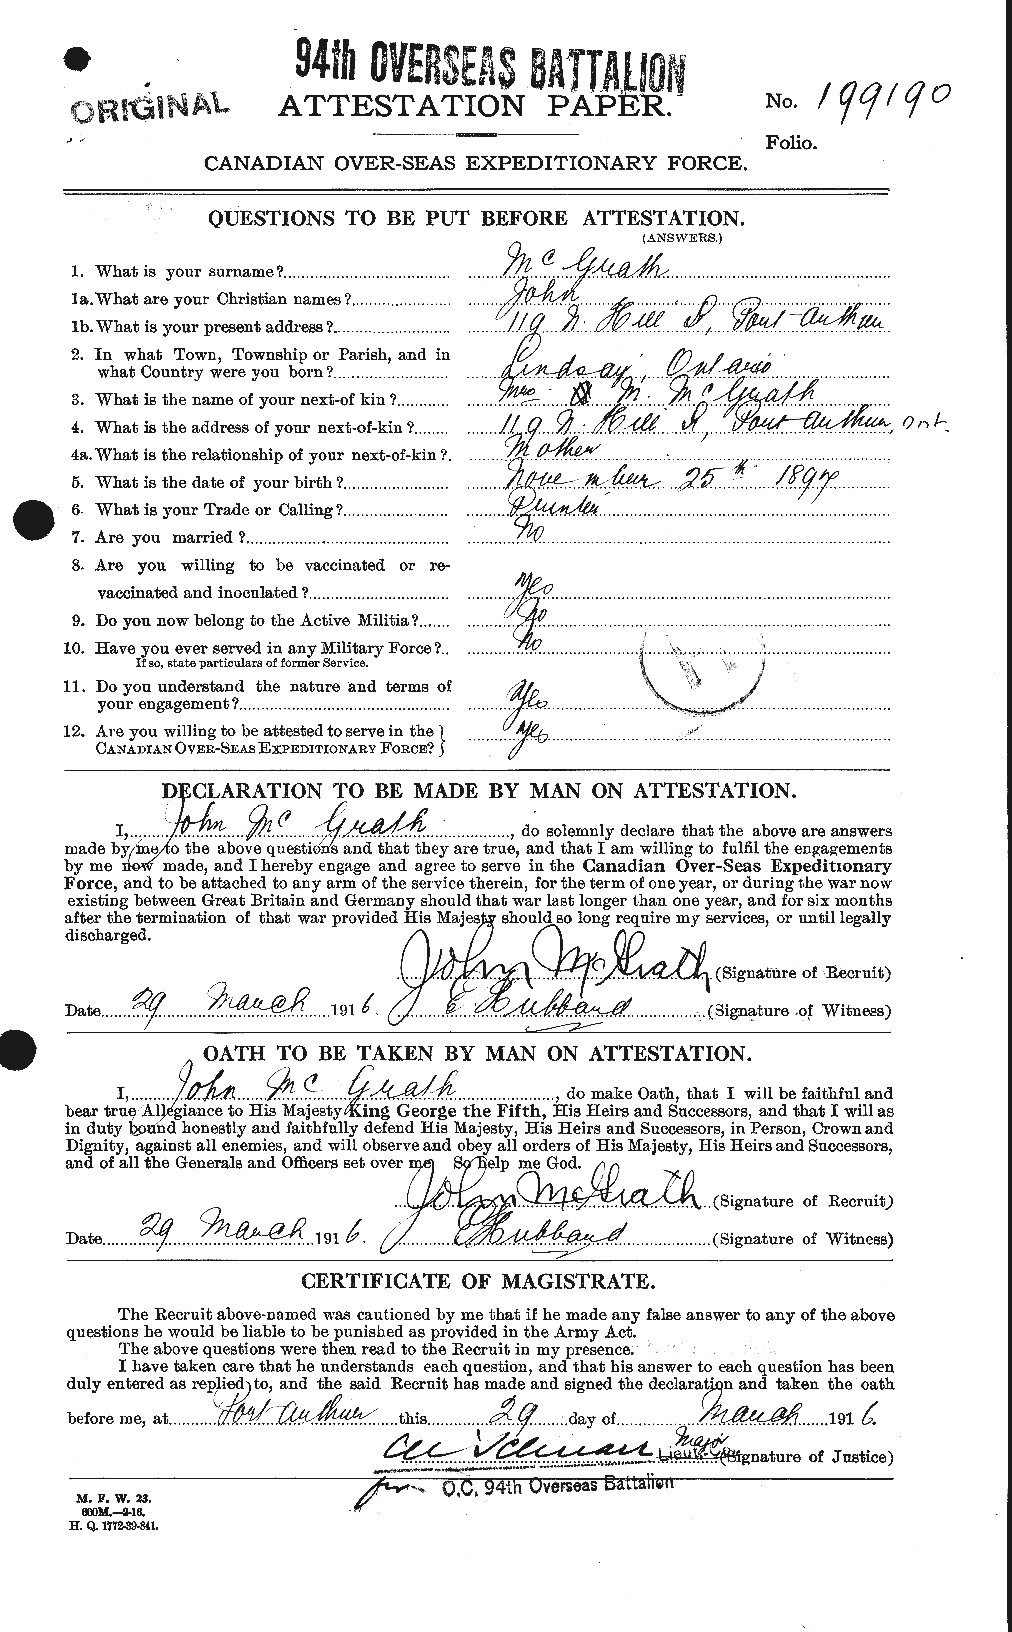 Personnel Records of the First World War - CEF 523595a